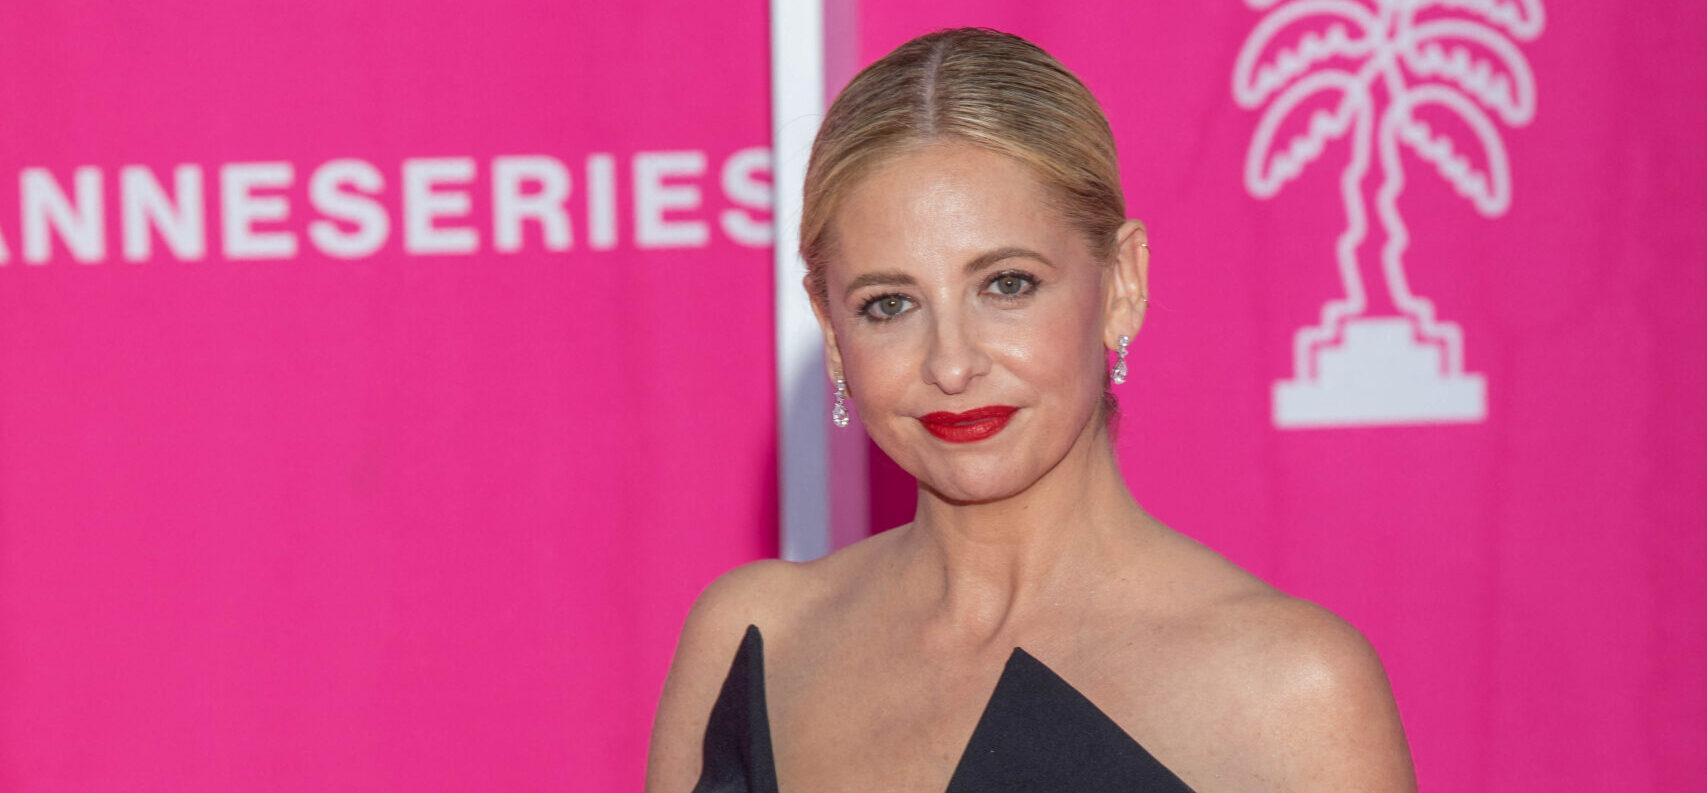 Time For A Reset: Sarah Michelle Gellar Joins The Global Day Of Unplugging